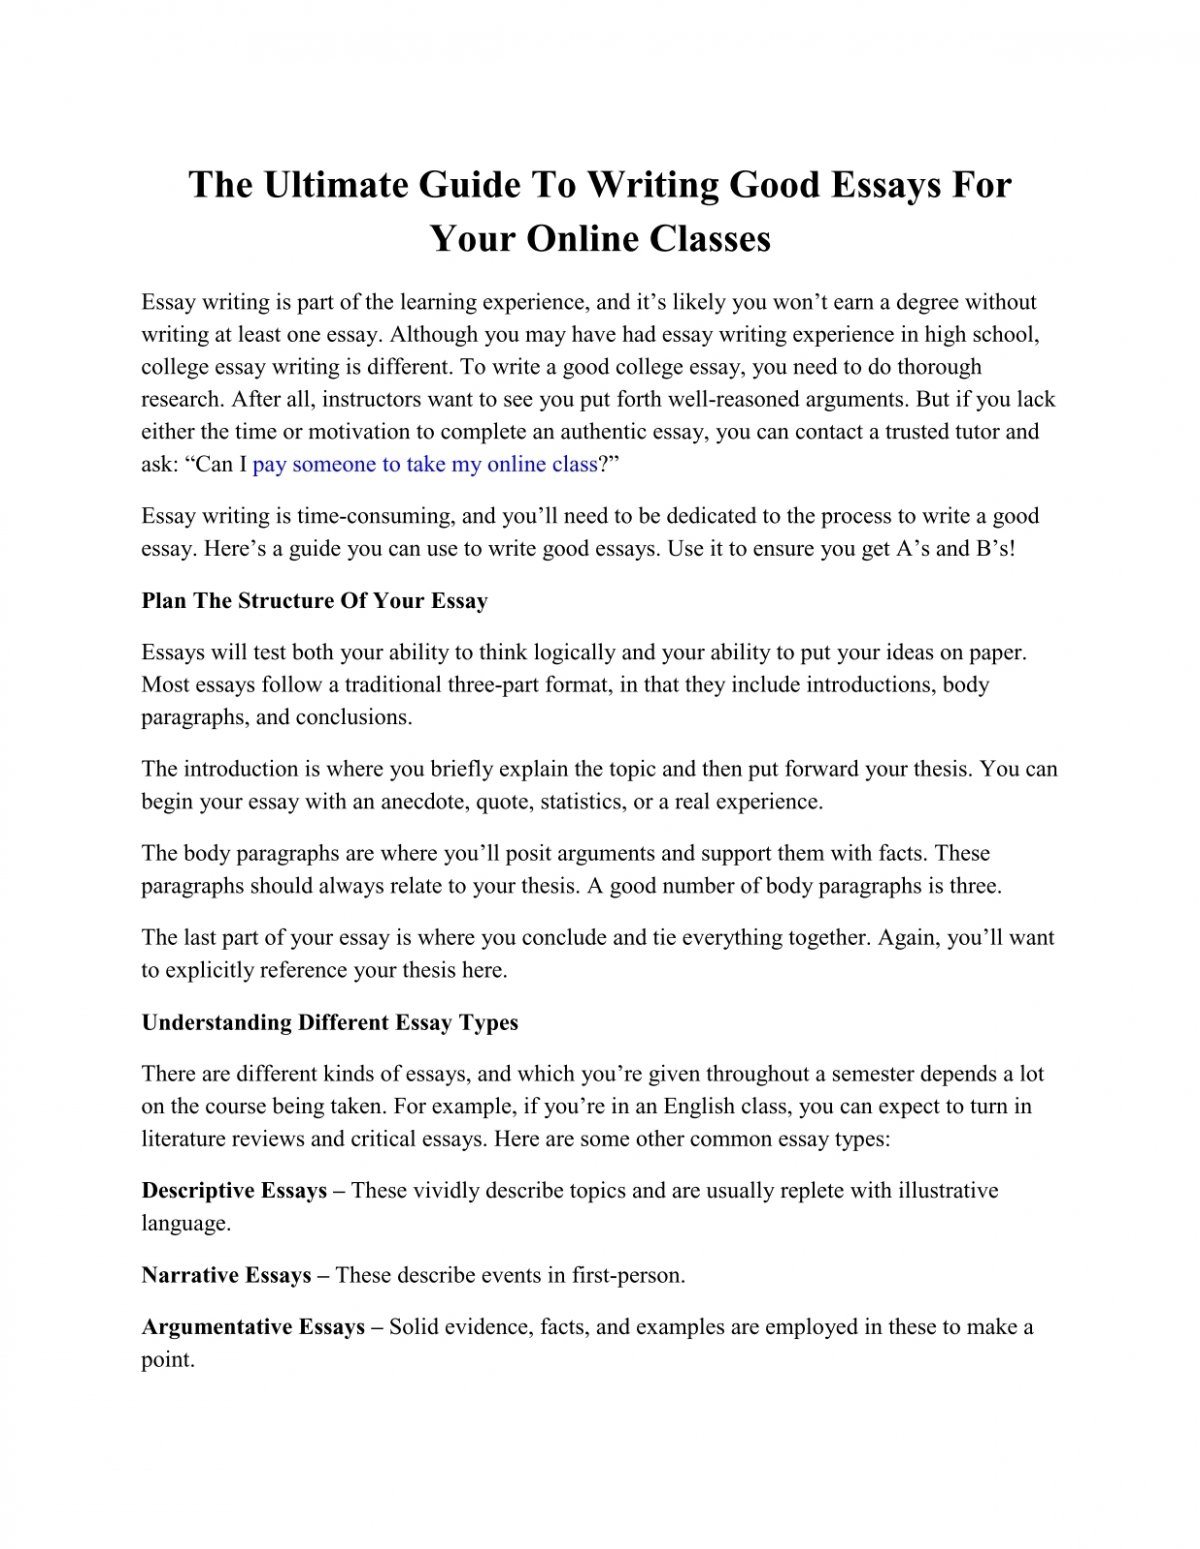 essay writing about online classes